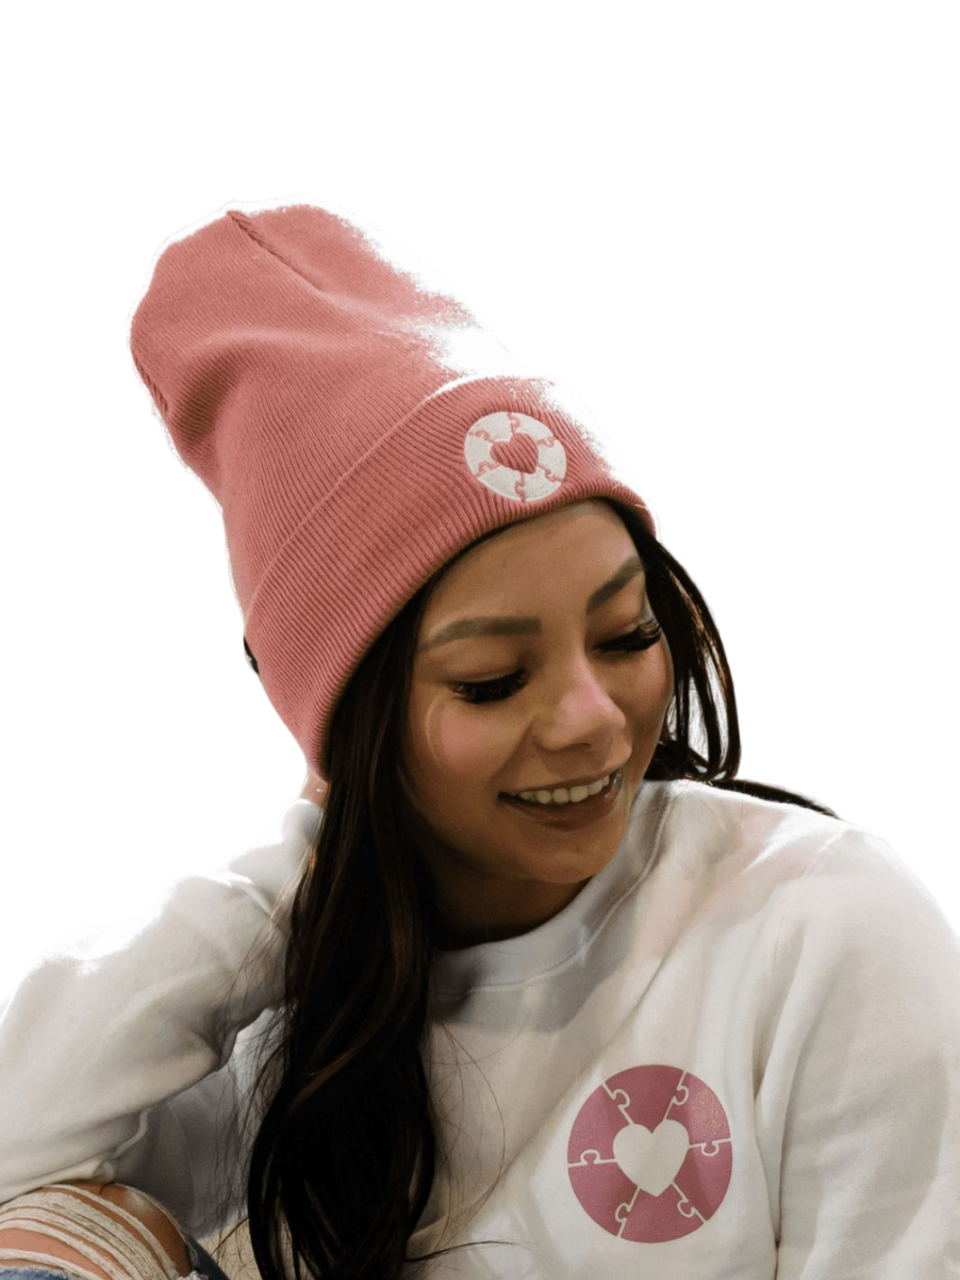 Individual wearing faded rose coloured hat that features a white heart sewn patch. This hat is a collaboration piece between Local Laundry and the Ryder's Foundation to support those diagnosed with autism. These toques are sustainably sourced and manufactured in Canada.